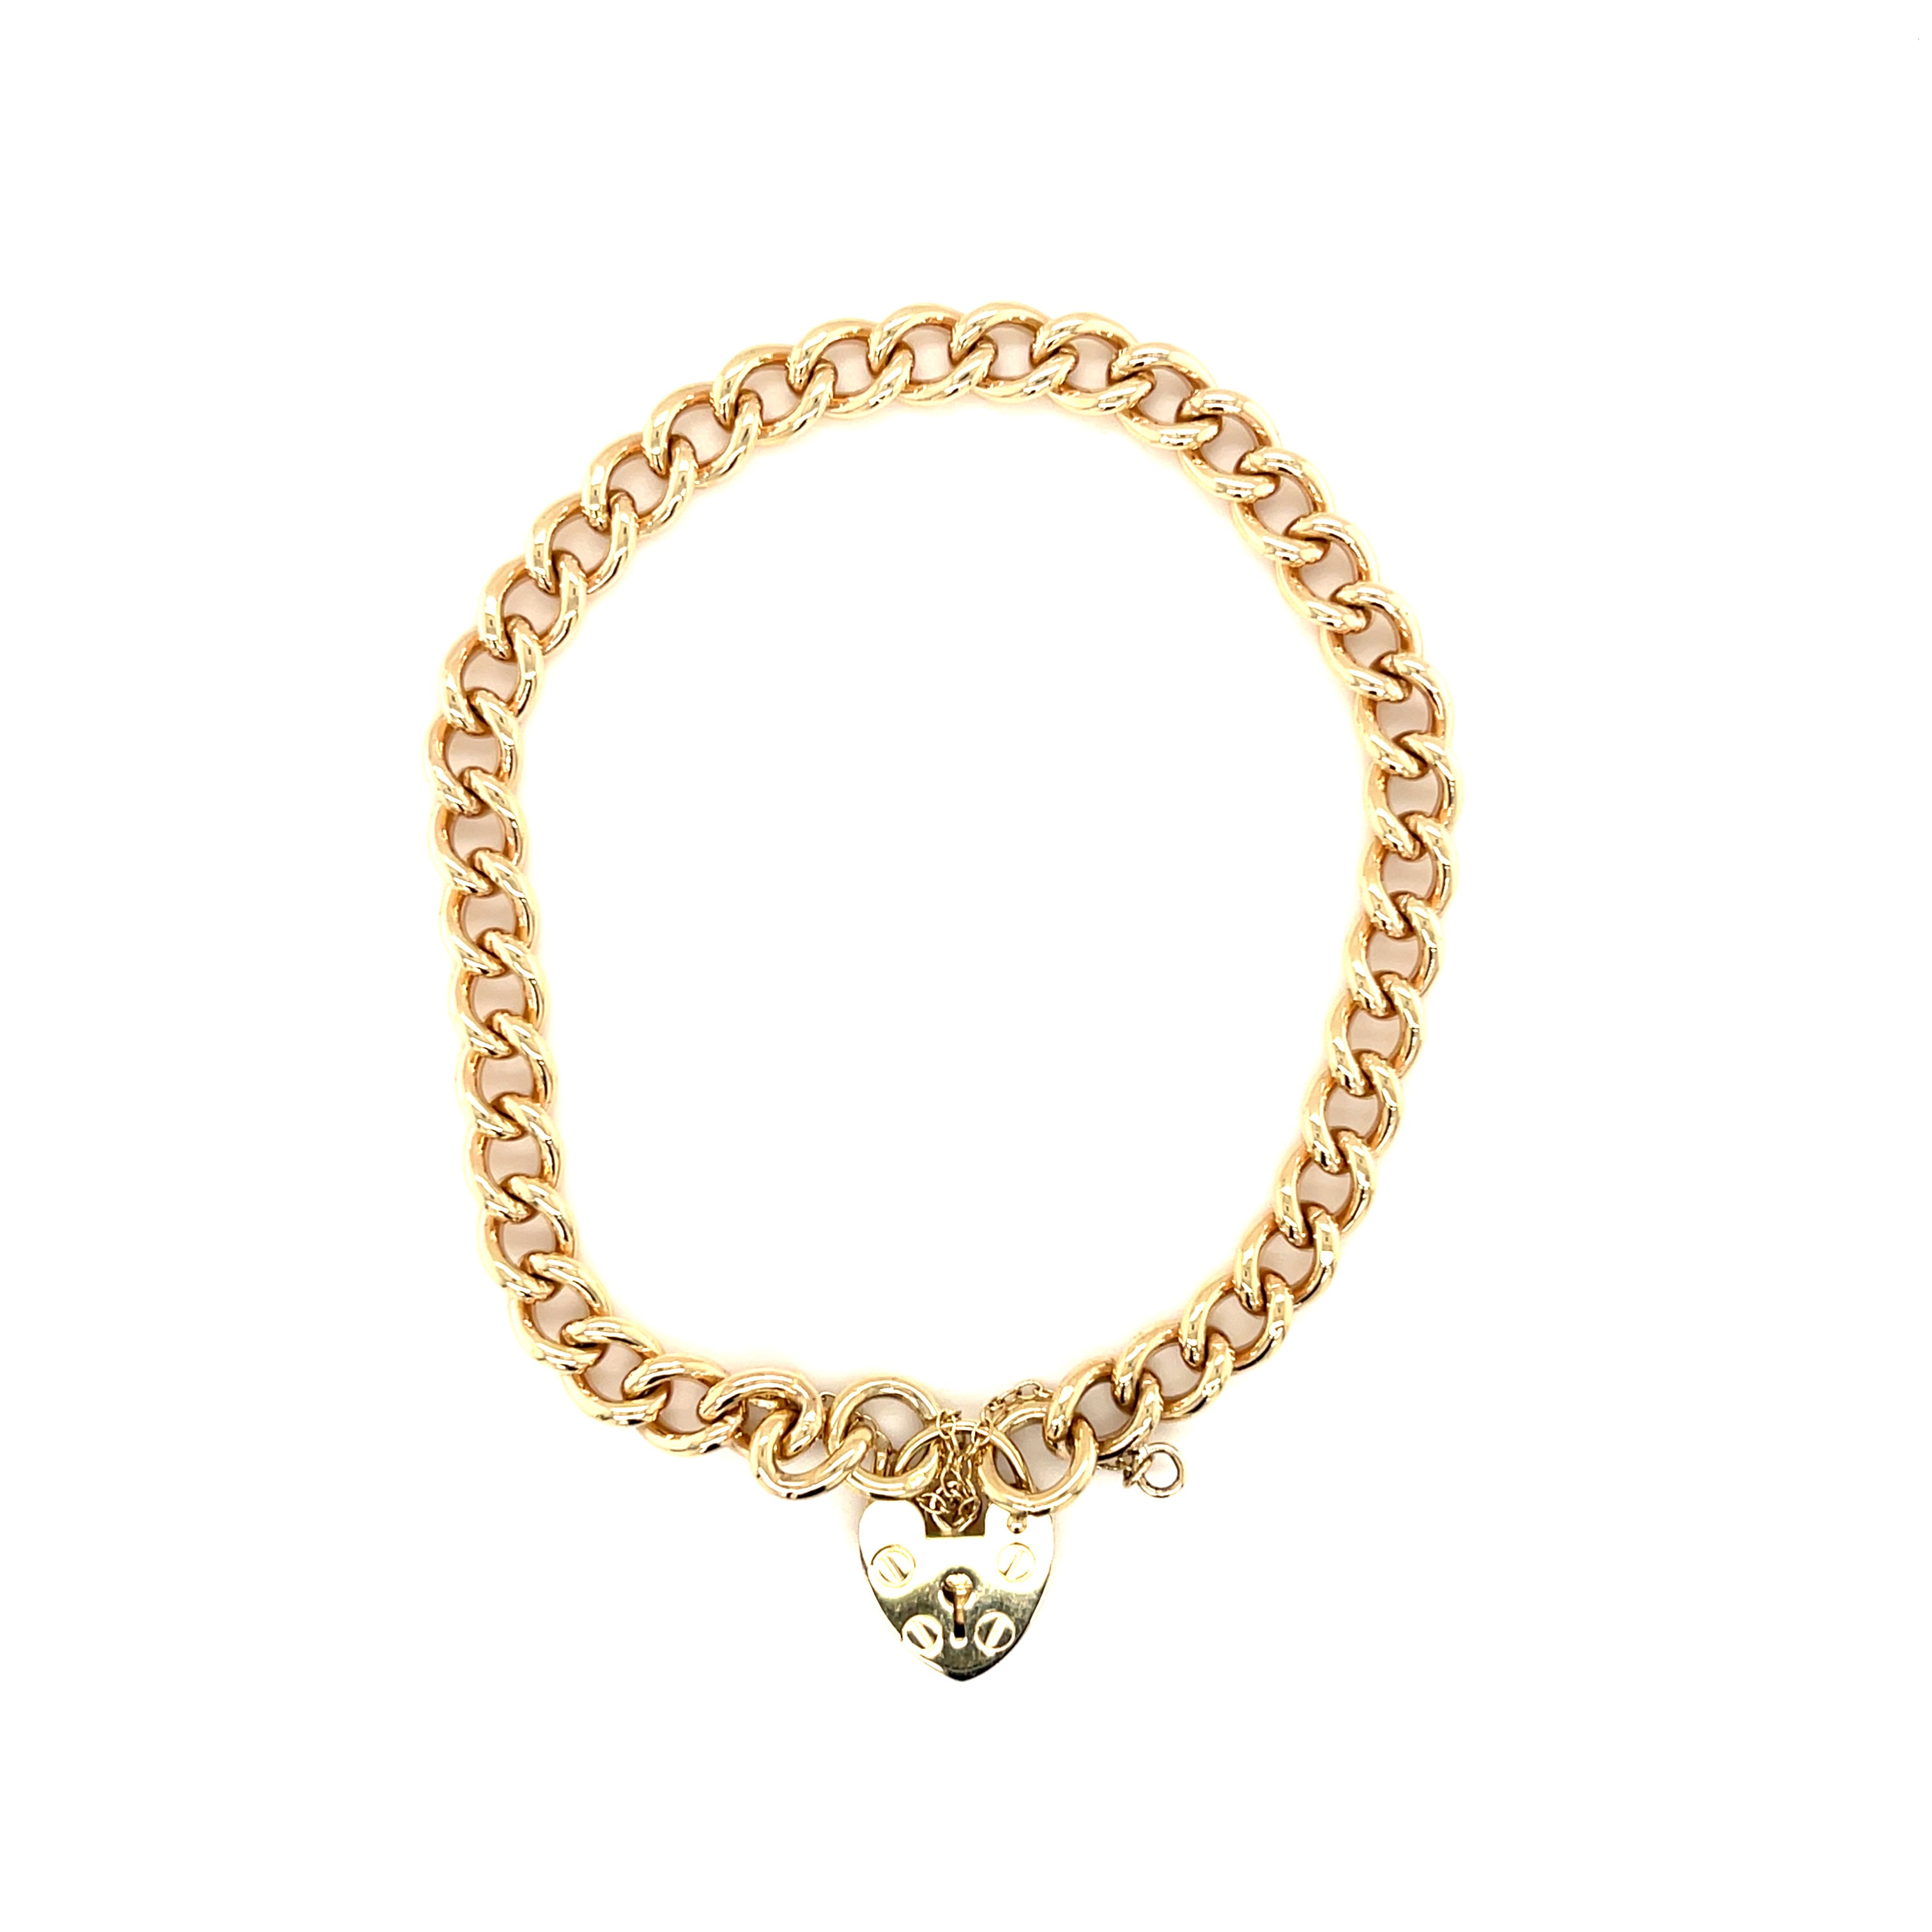 9ct Yellow Gold 7" Traditional Charm Bracelet - 16.70g SOLD